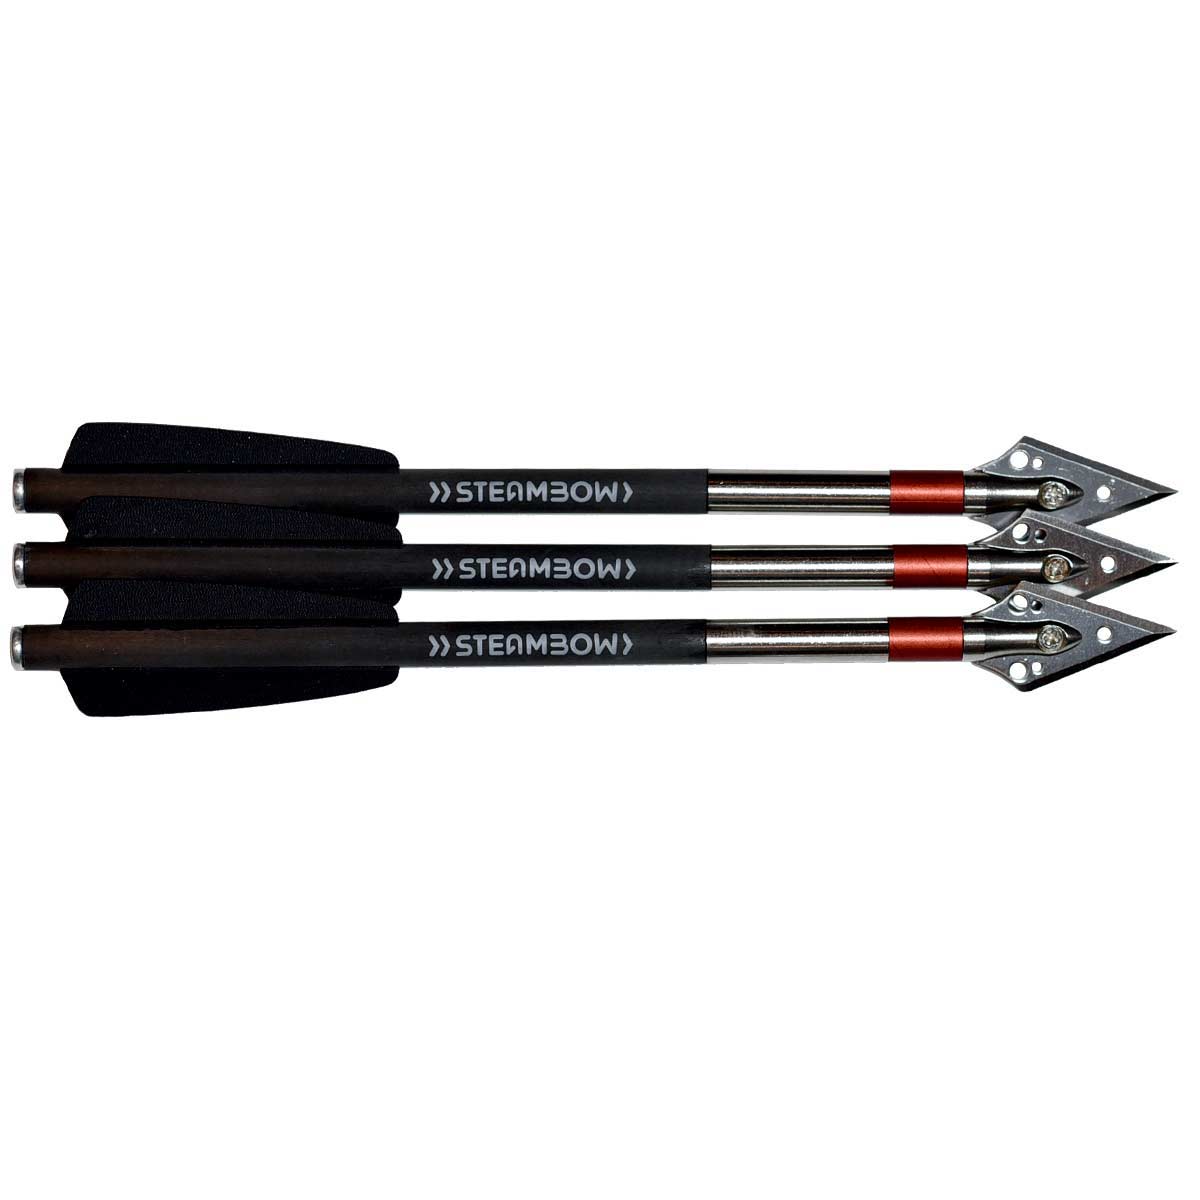 AR-Series Carbon Hunting Arrows – Set of 3 pcs. – Sellout!